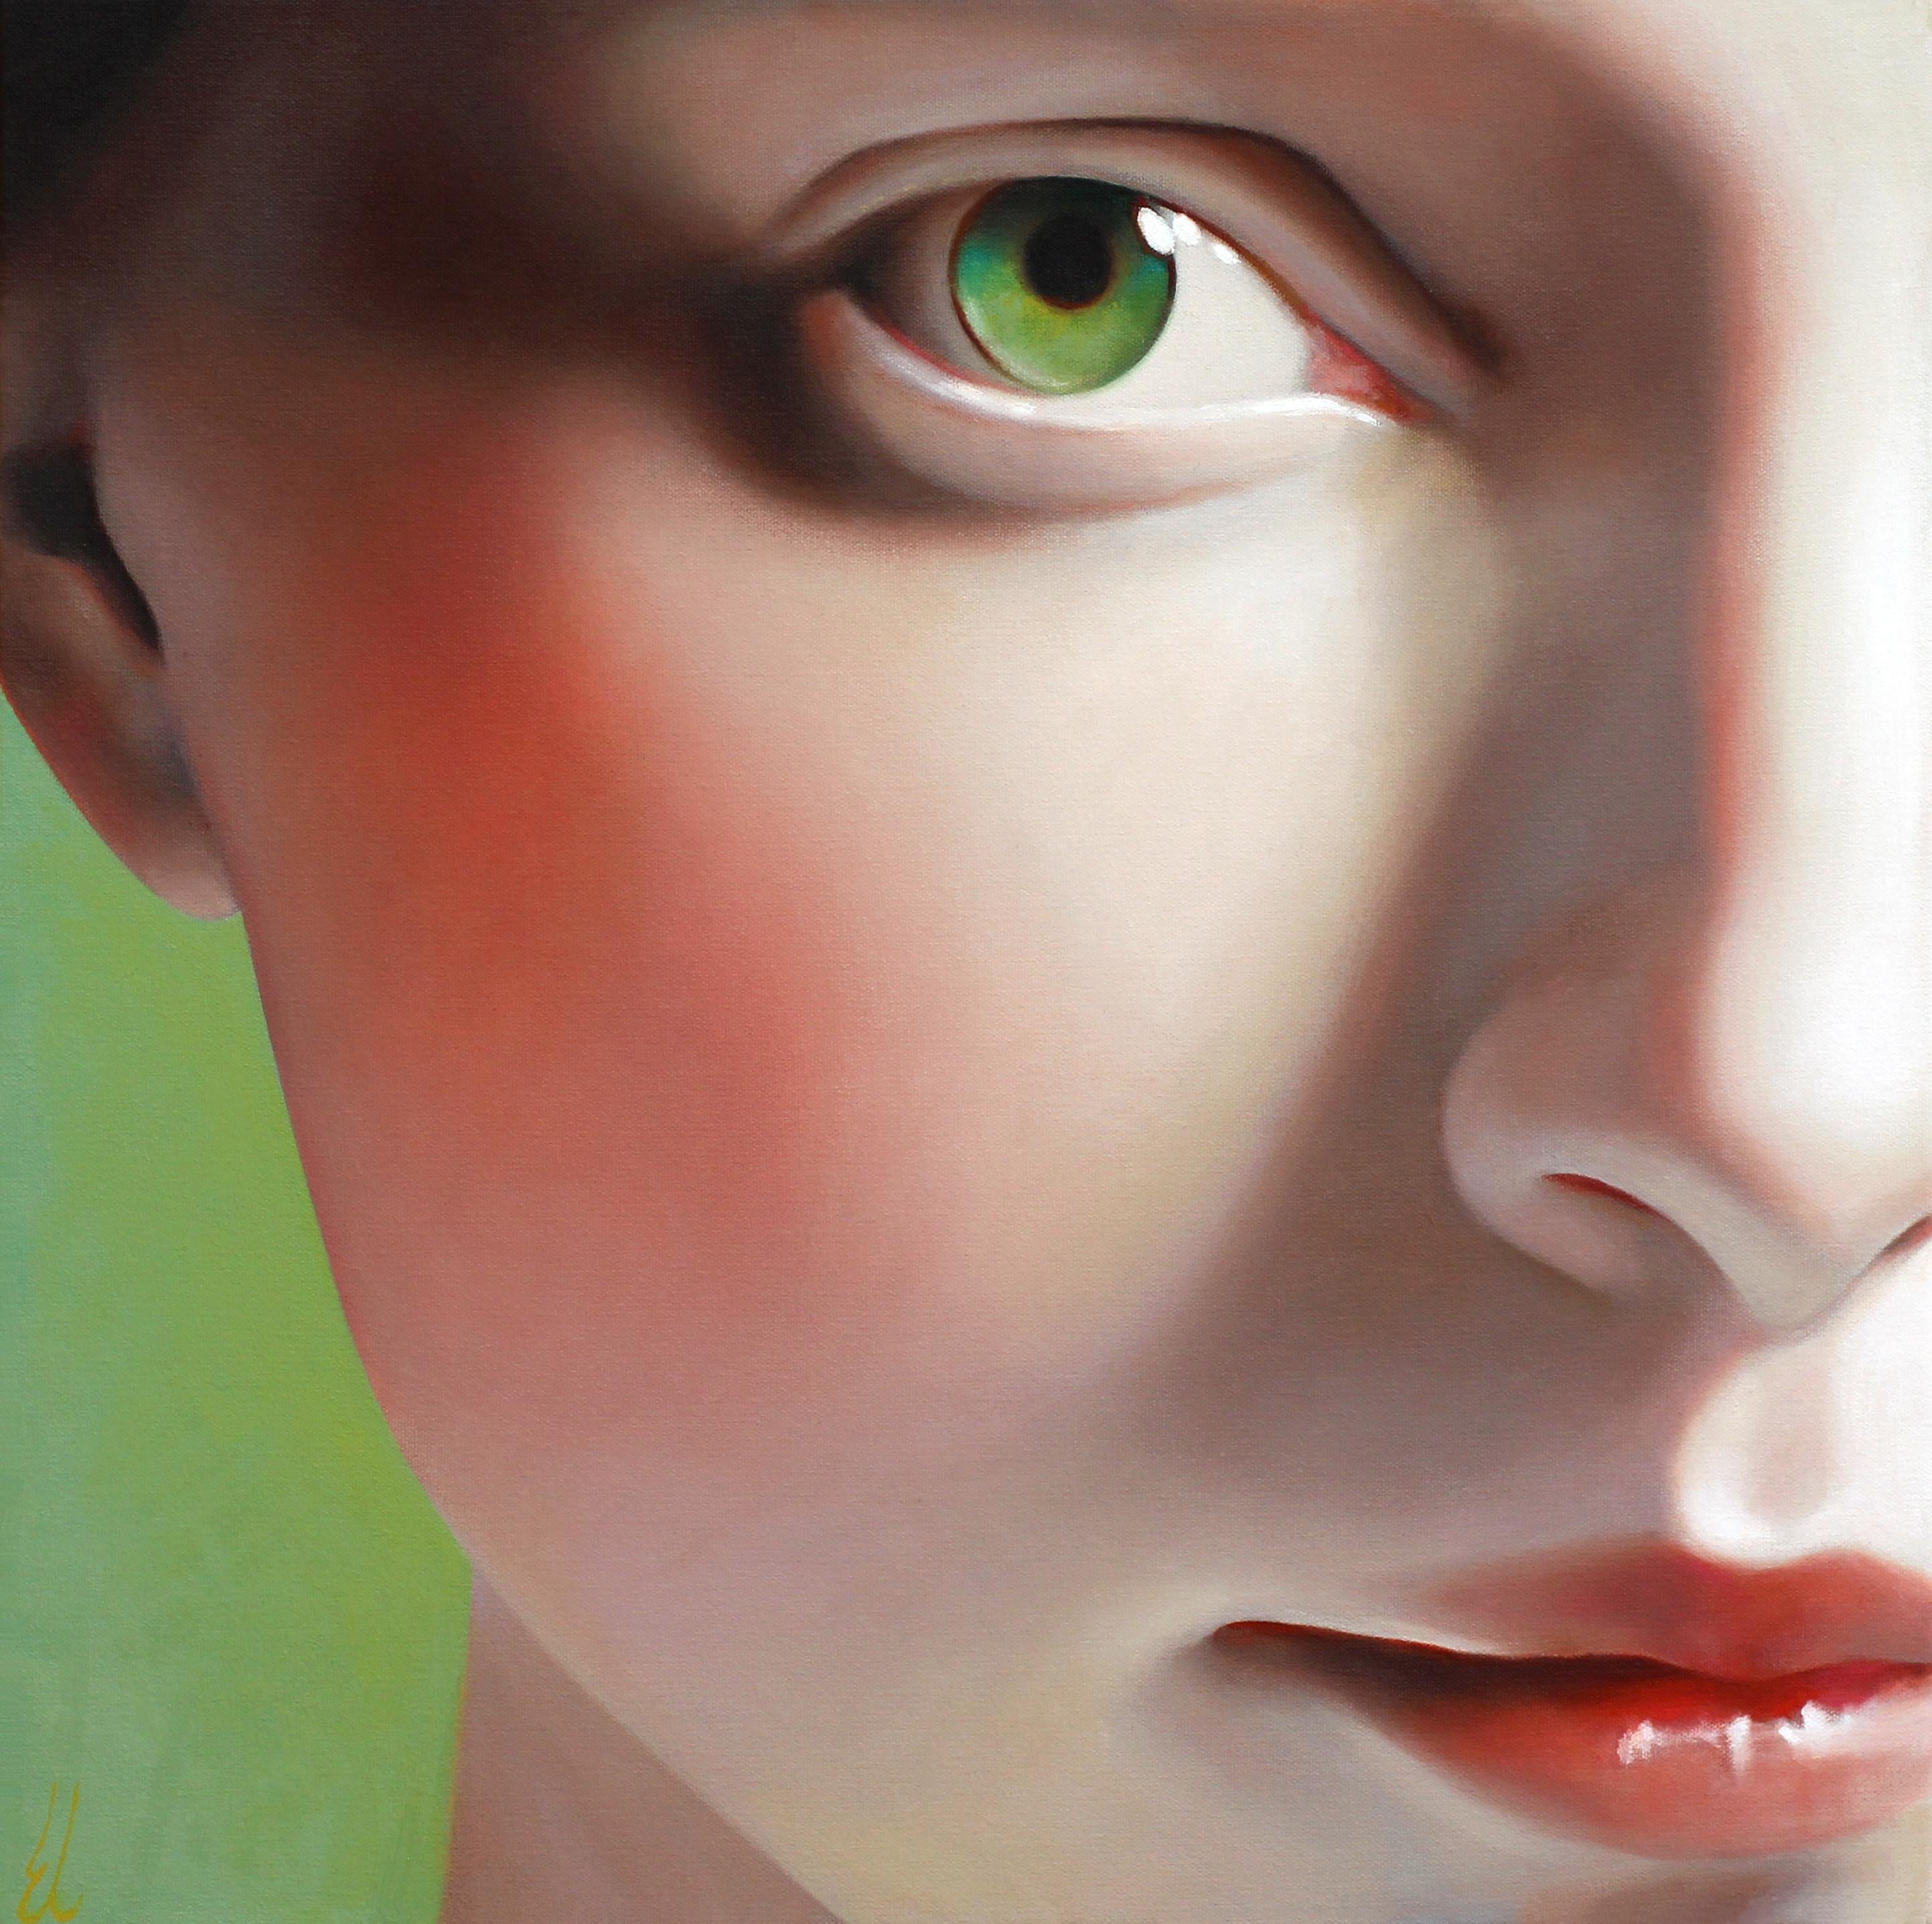 Erin Cone Figurative Painting - "Laurel", Oil on canvas, modern realism, female portrait with green eyes 